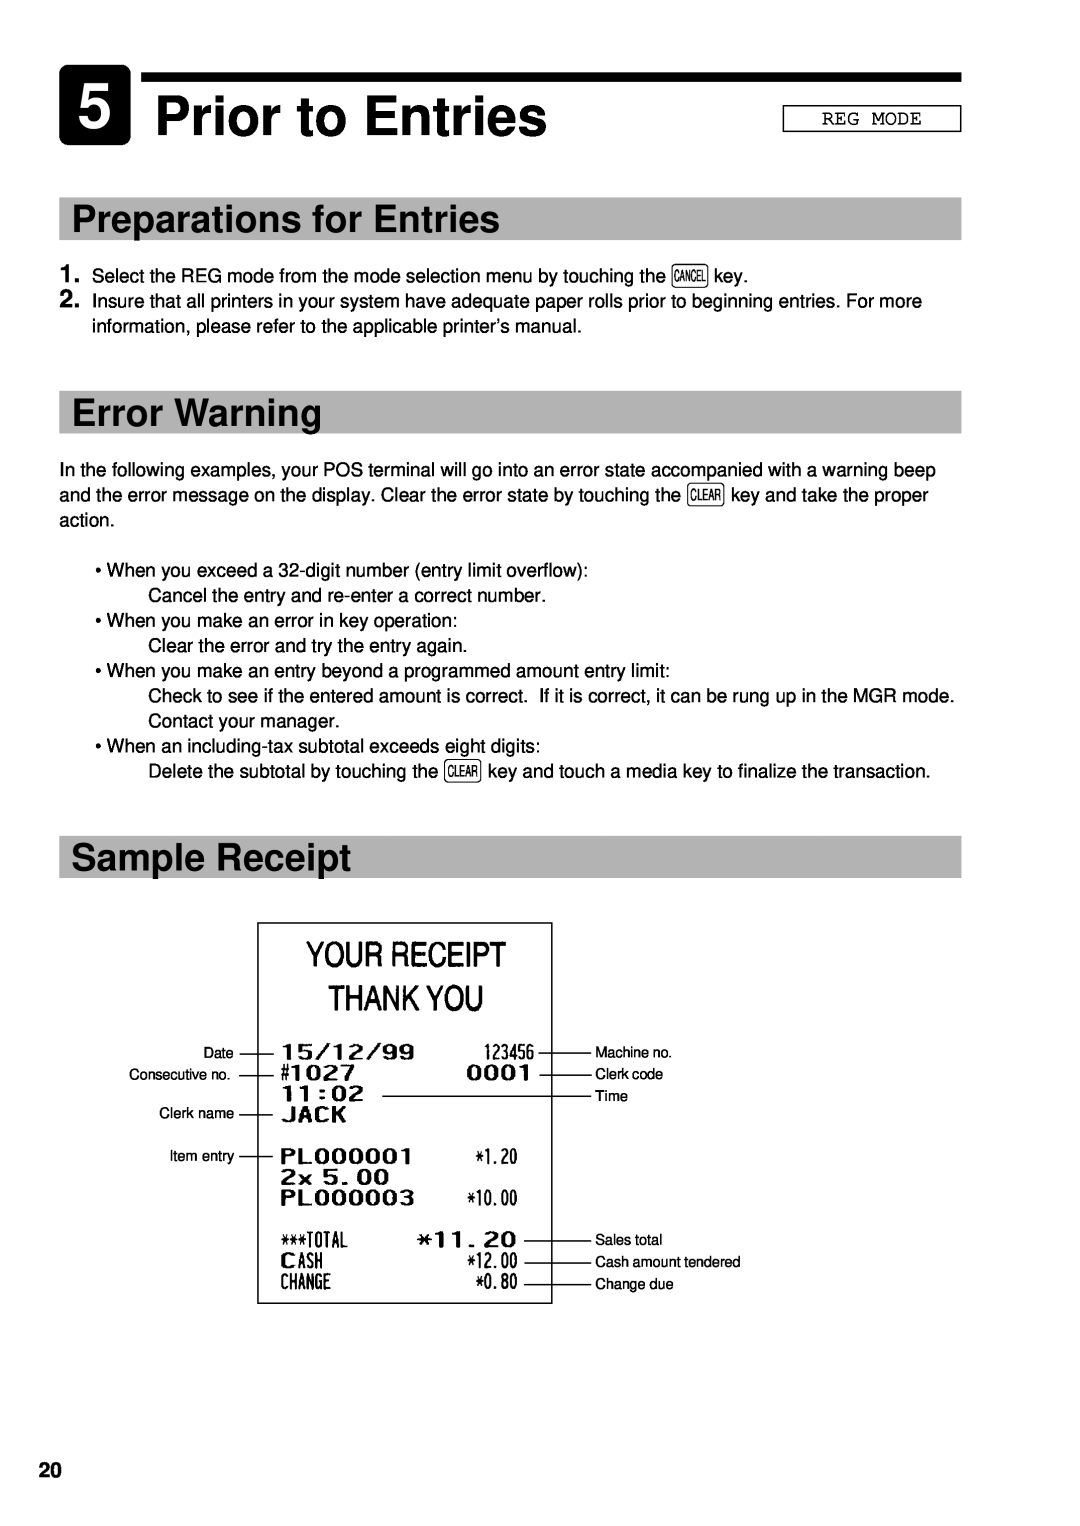 Sharp UP-3300 instruction manual 5Prior to Entries, Preparations for Entries, Error Warning, Sample Receipt, Reg Mode 